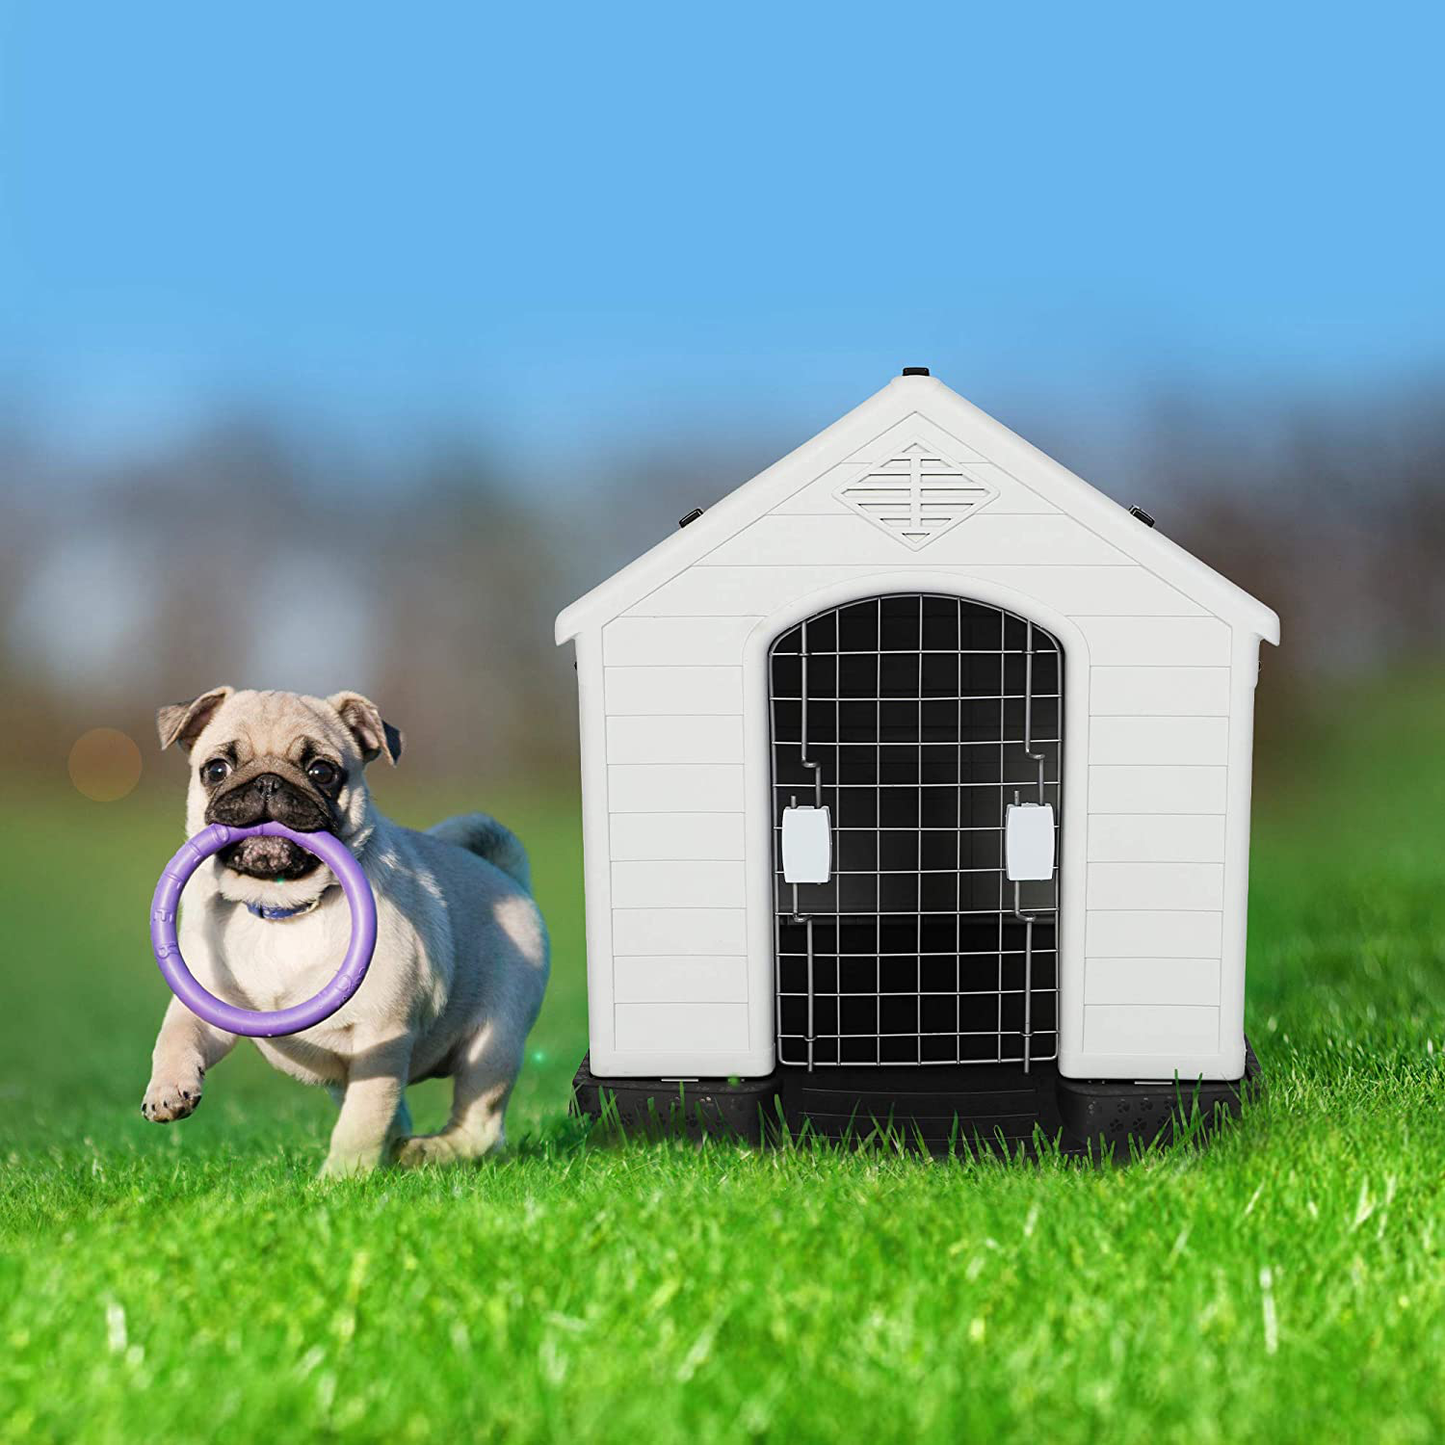 LONABR Plastic Outdoor Dog House for Pet Weatherproof Kennel Small to Large Size,Blue & White